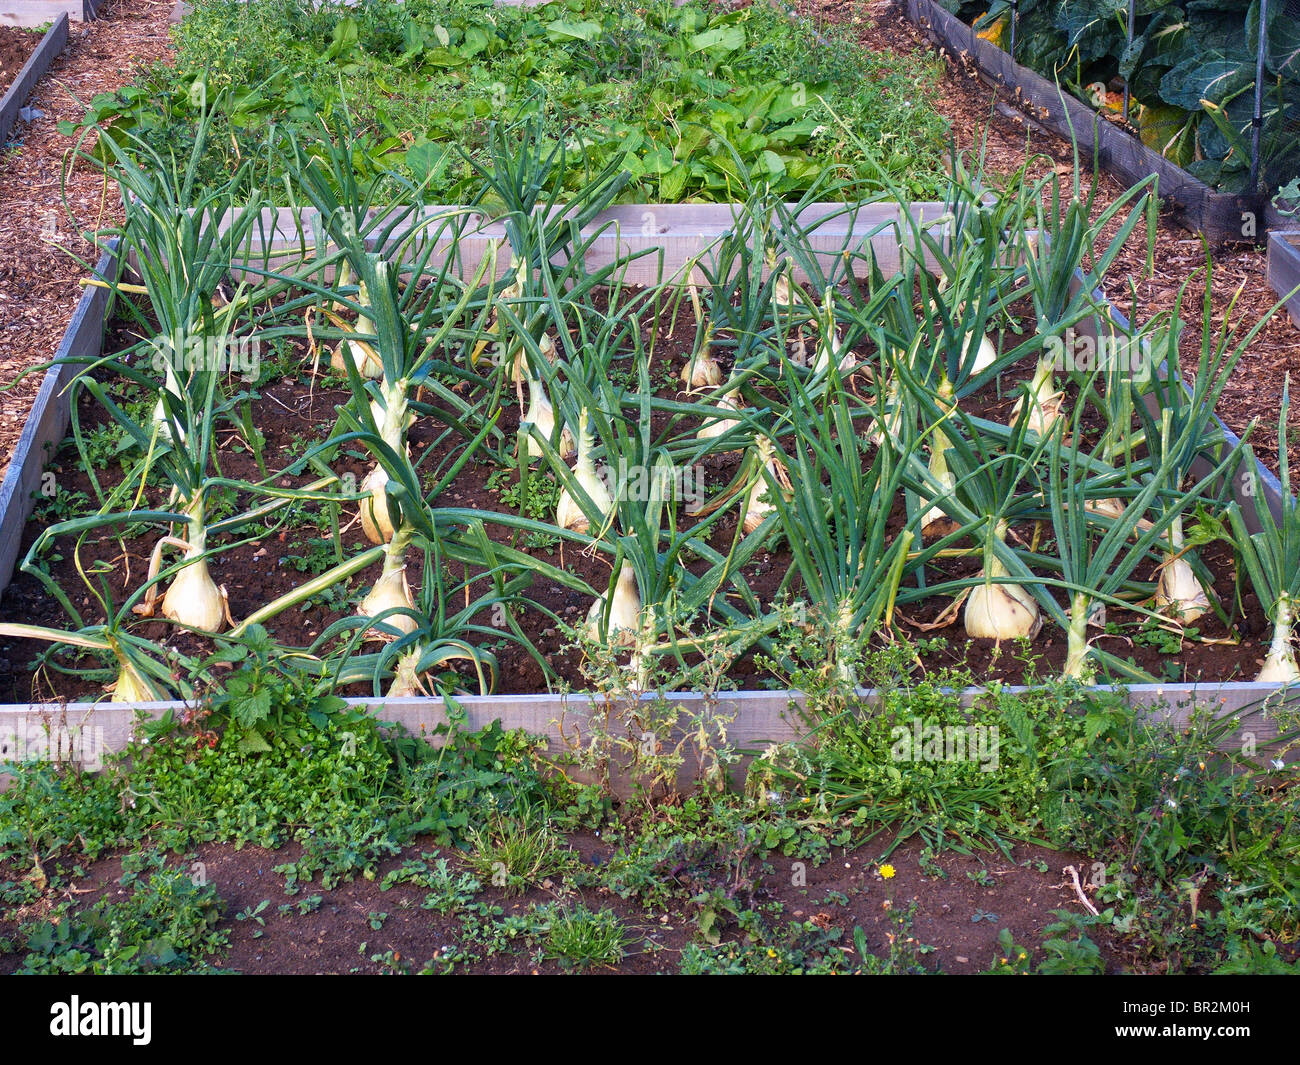 Large onions growing in an allotment garden Stock Photo